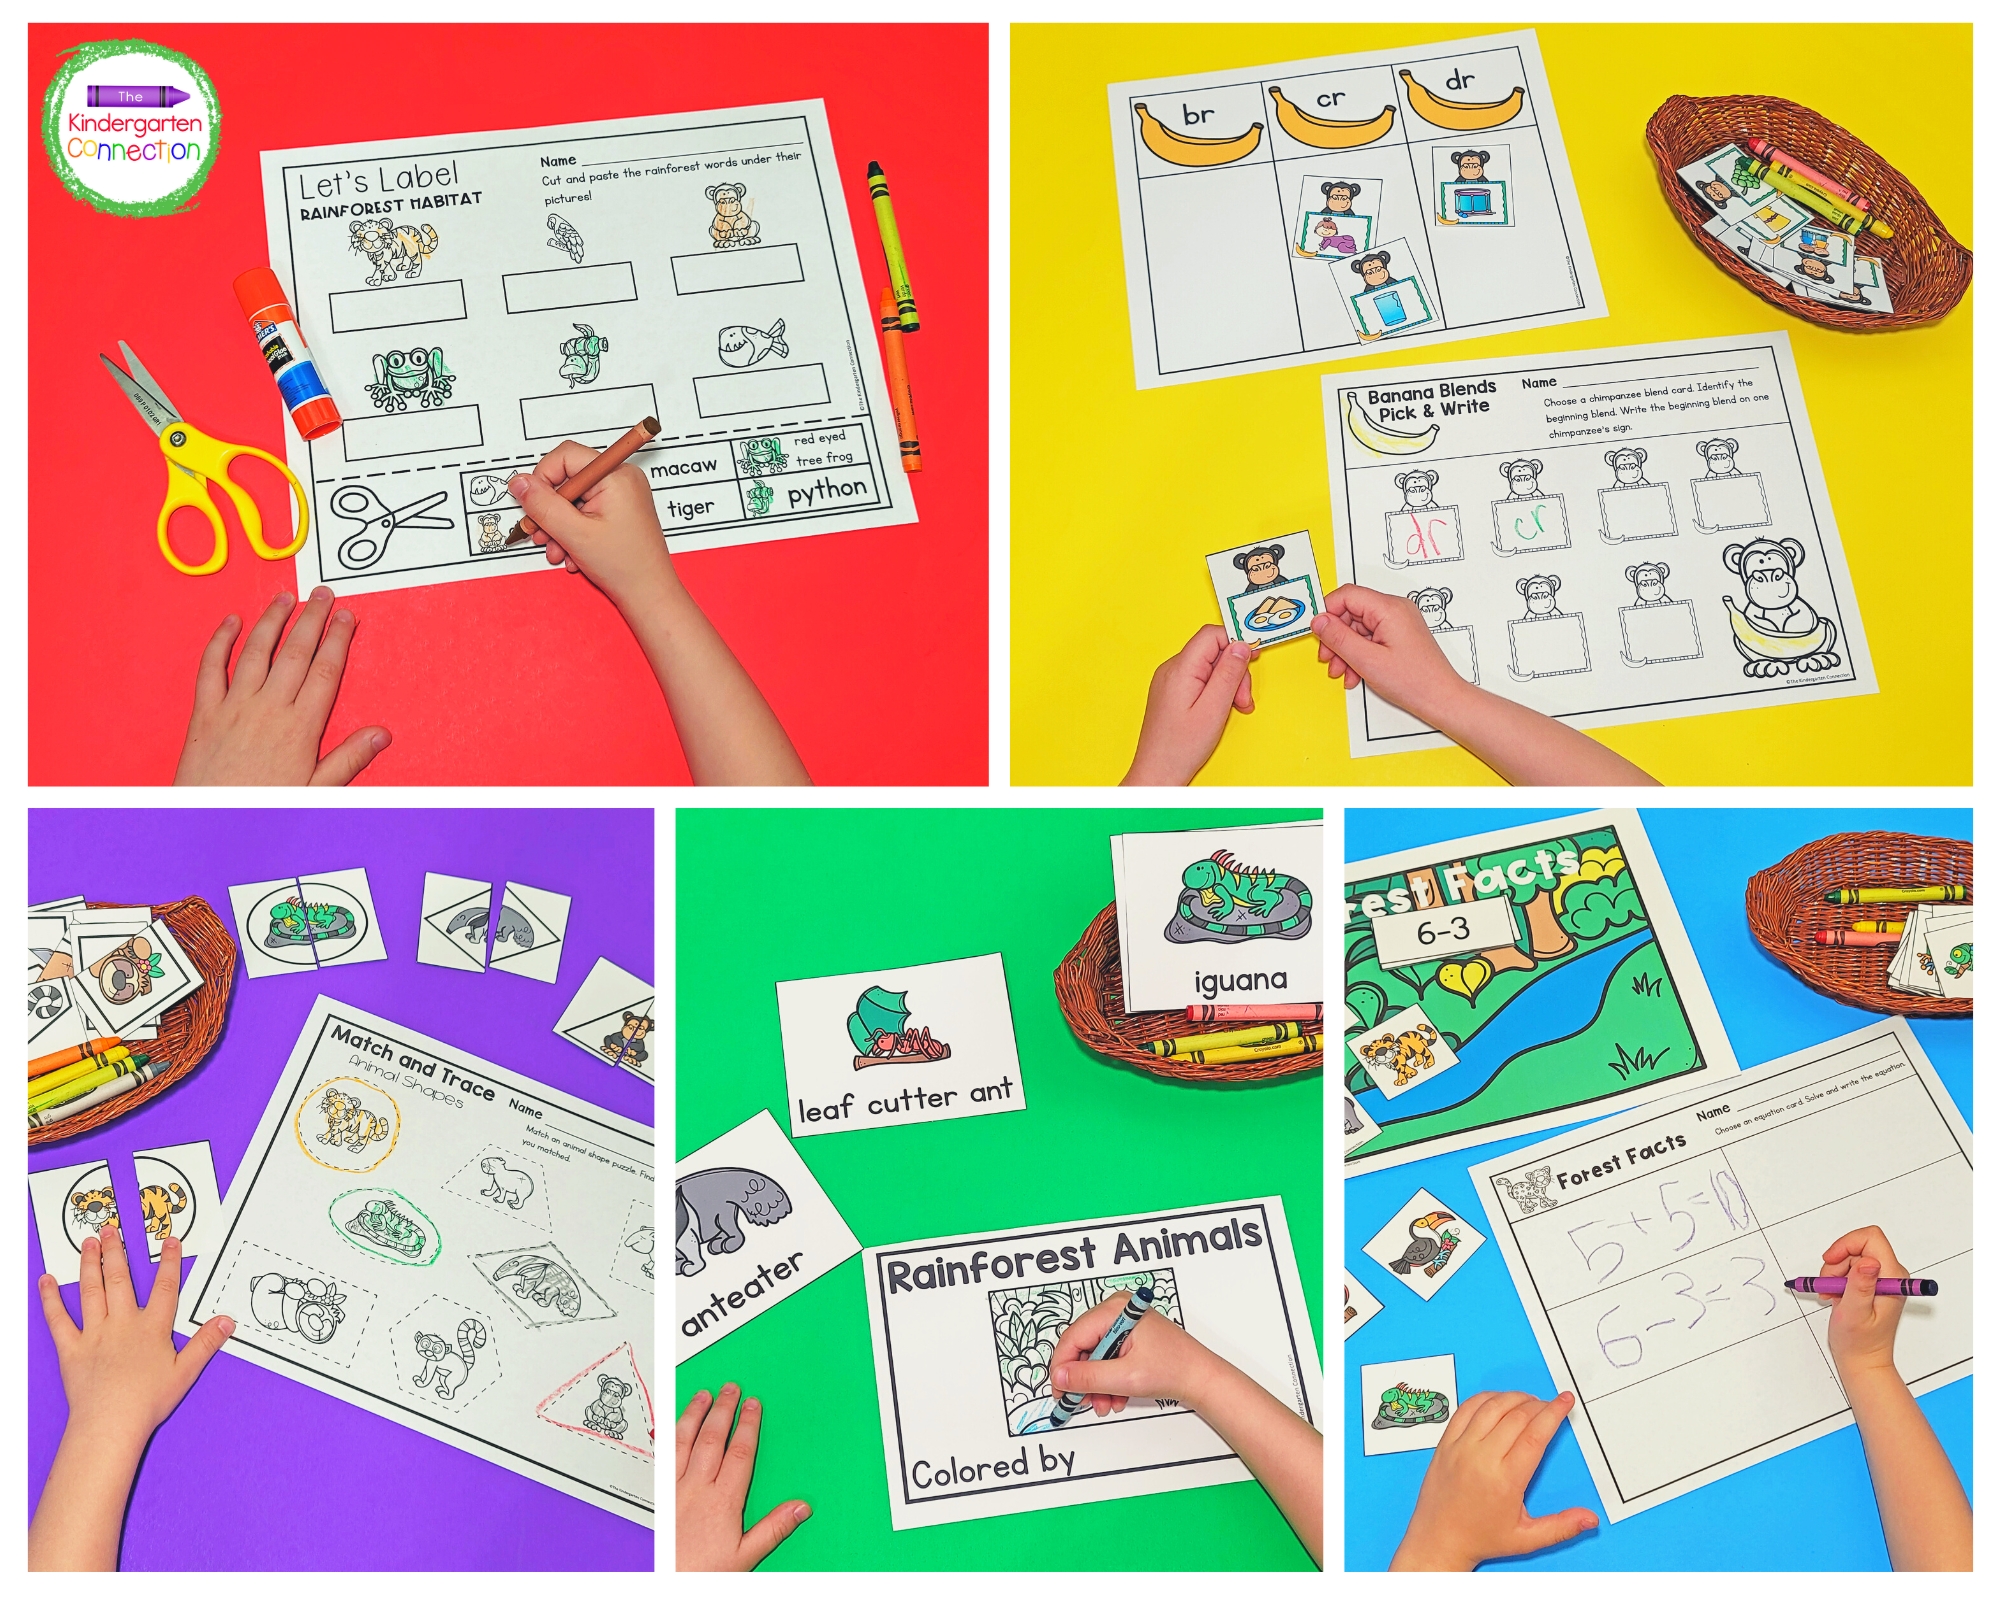 This resource pack is filled with tons of hands-on rainforest animal-themed math and literacy activities.